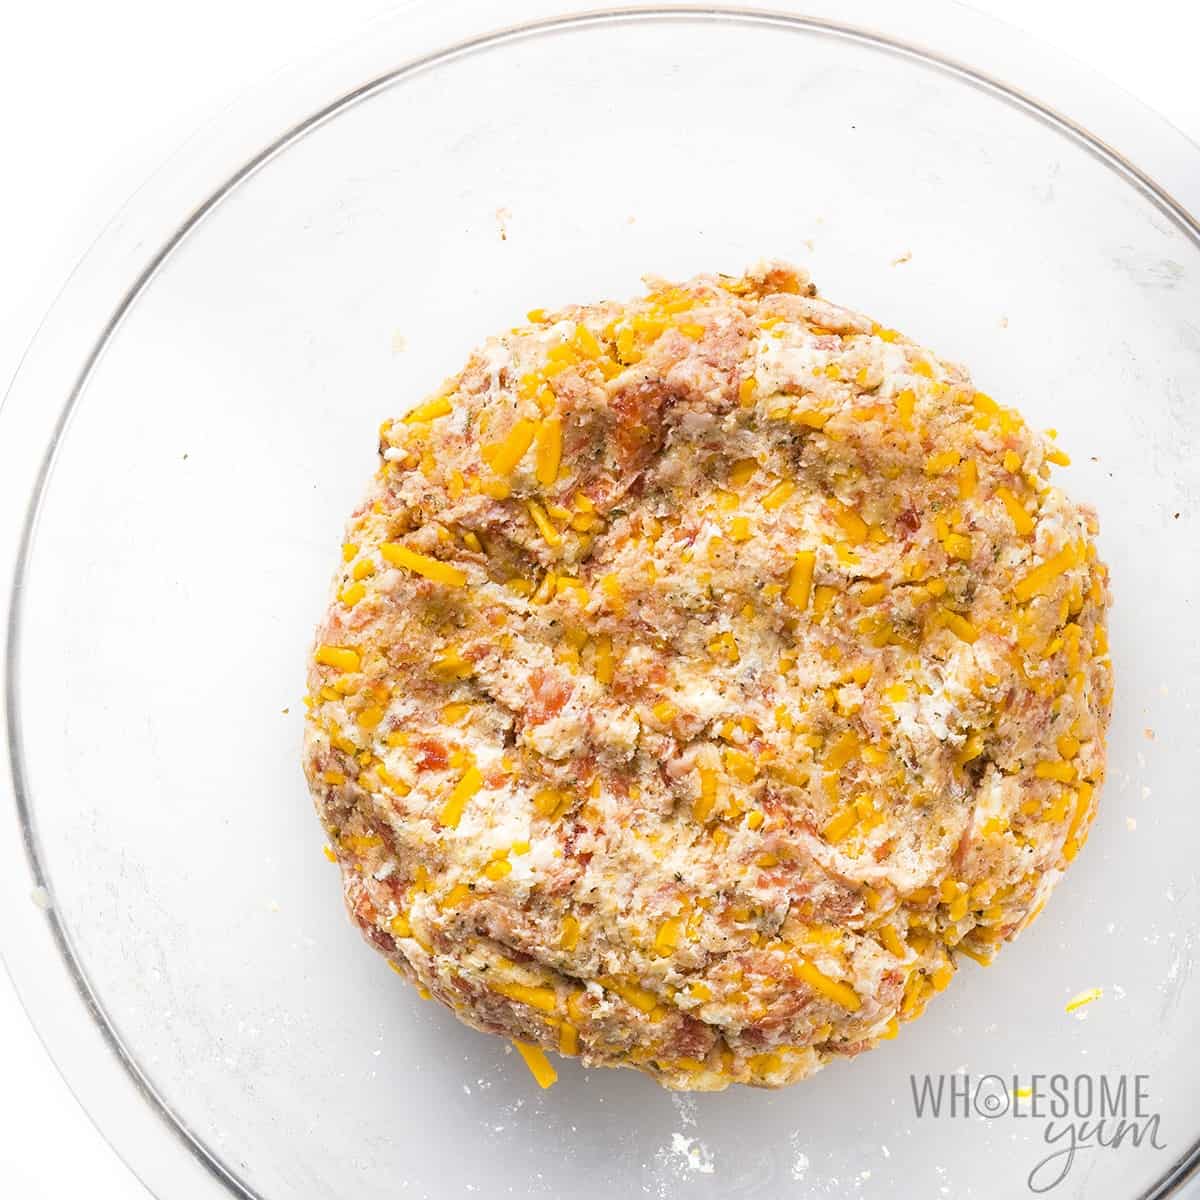 Sausage ball mixture in a bowl.